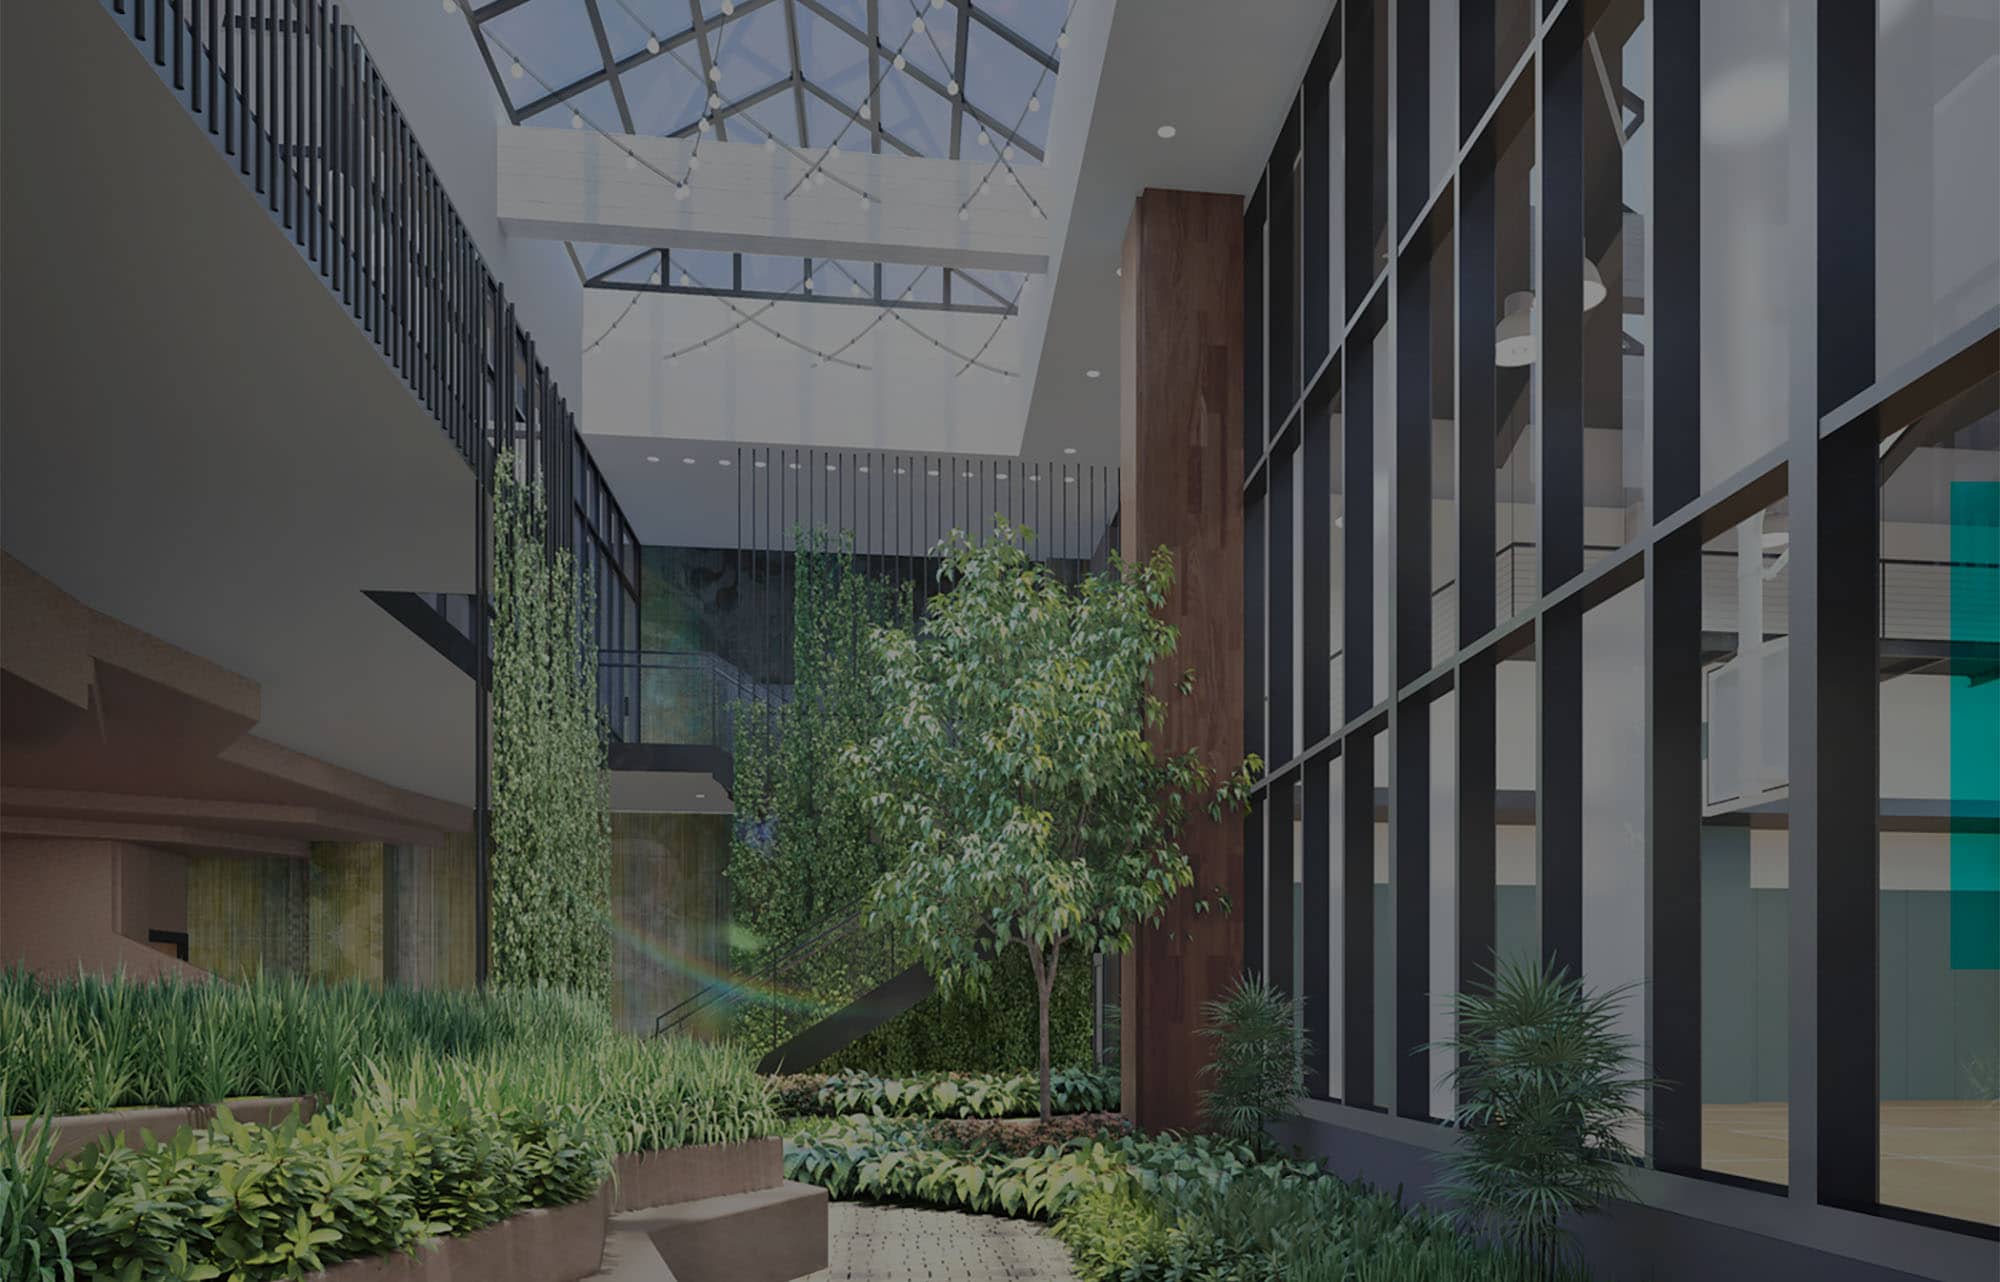 rendering of exterior of the collective apartment building featuring a whole foods grocery store on the bottom floor